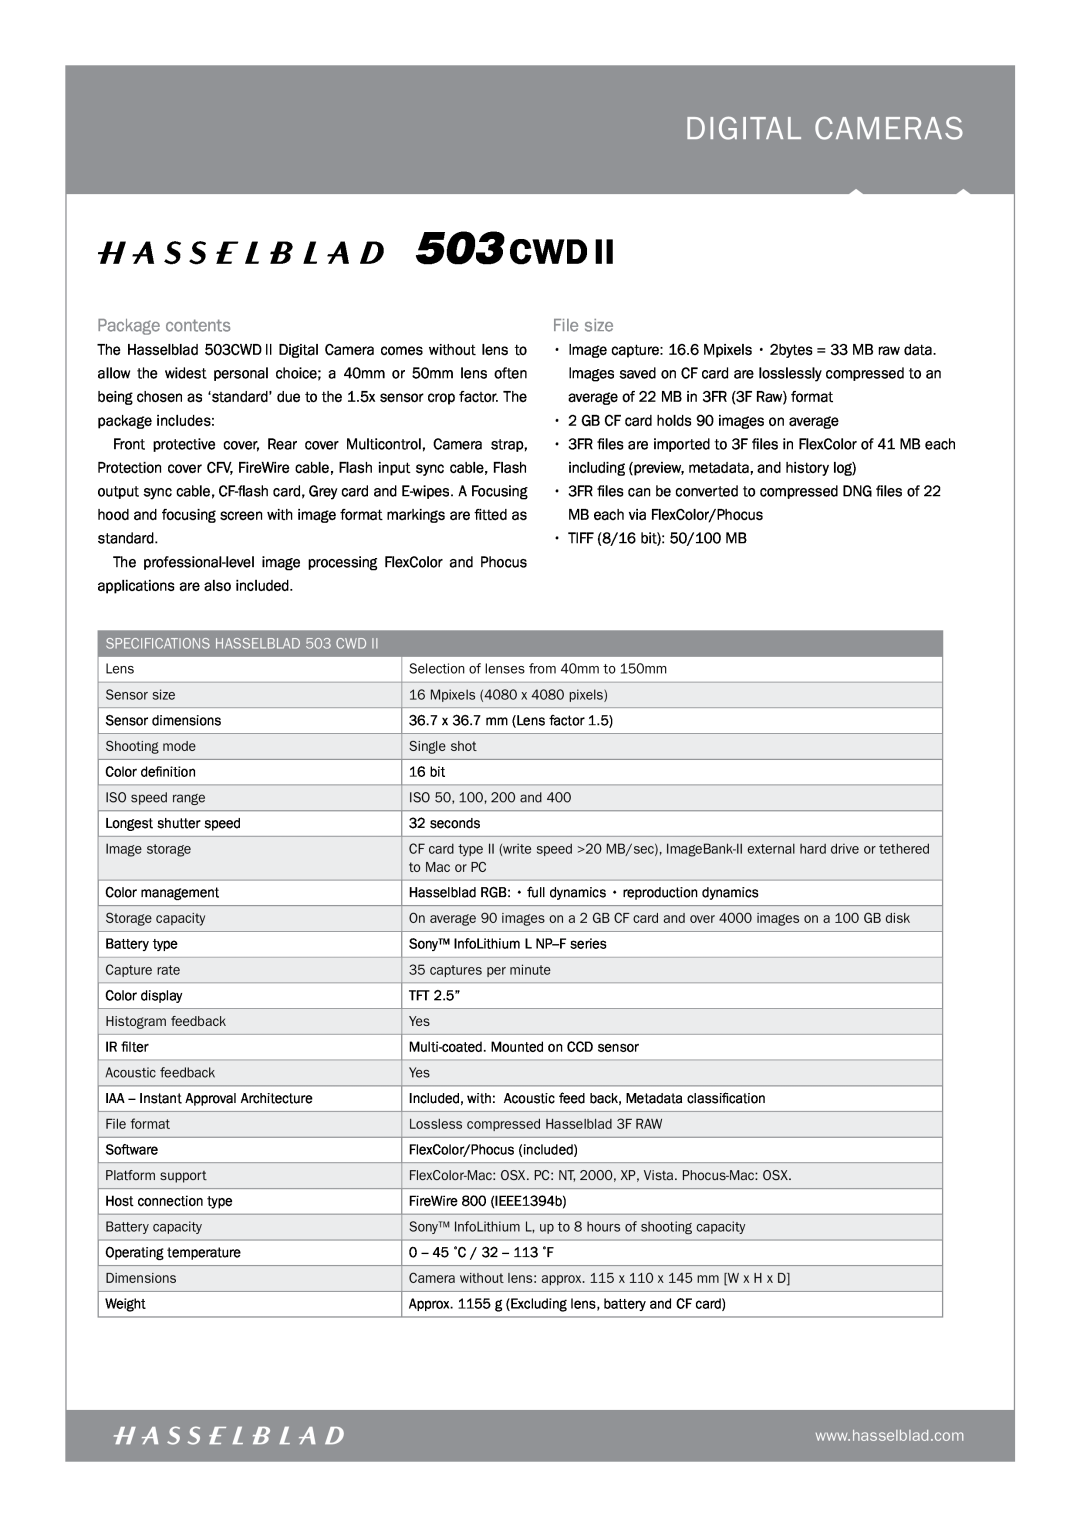 Hasselblad 503CWDII manual digital CAMERAS, Package contents, File size, SPECIFICATIONS HASSELBLAD 503 CWD 